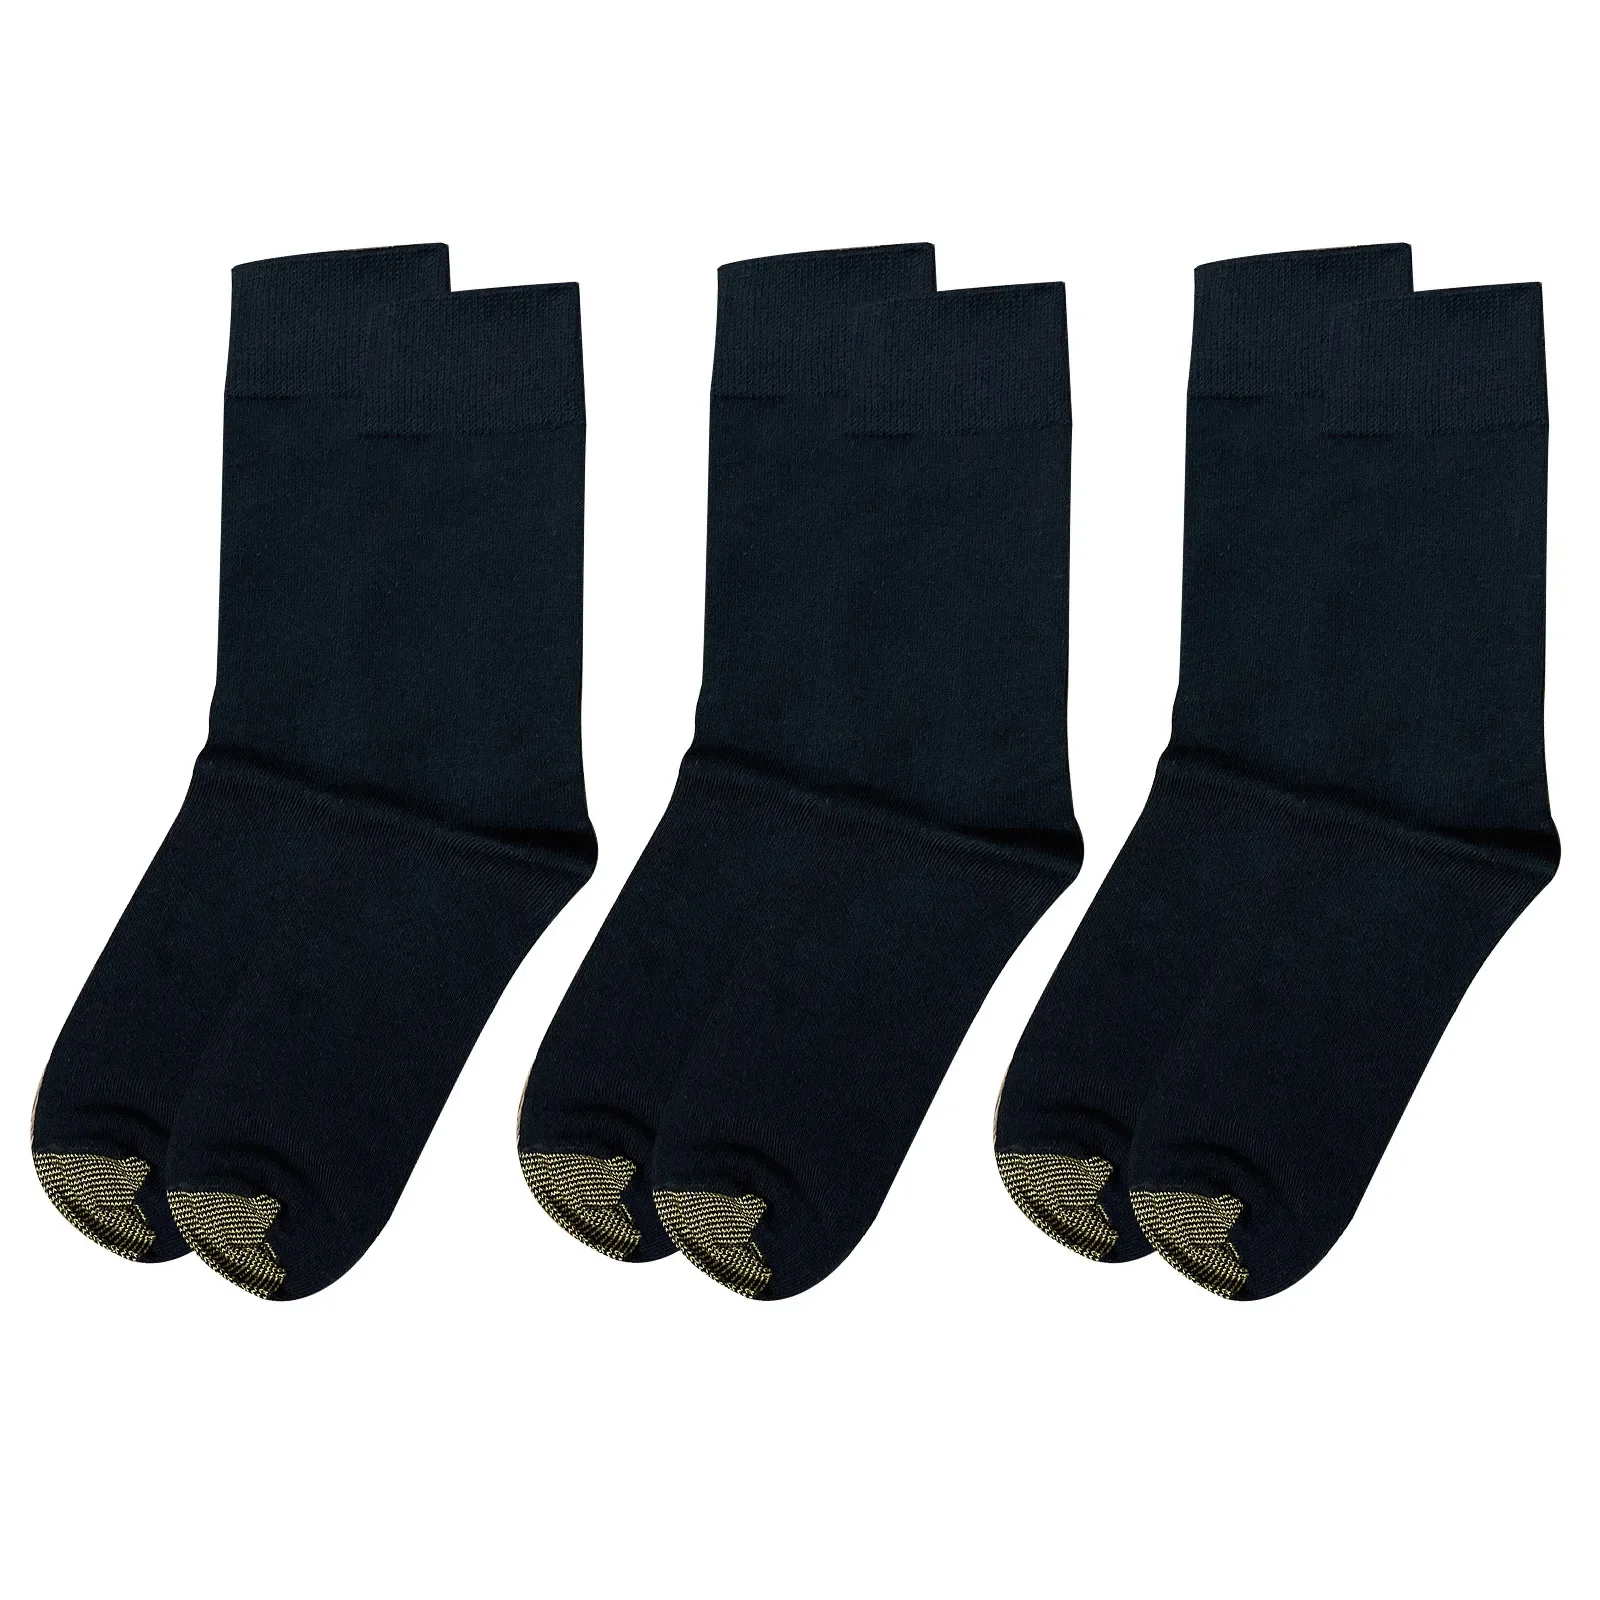 наматрасник clever cotton 180x195 см белый CLEVER-MENMODE 3 x Cotton Socks Men Formal Tube Sock Business Male hombre Sports Casual Soft Fashion Comfortable